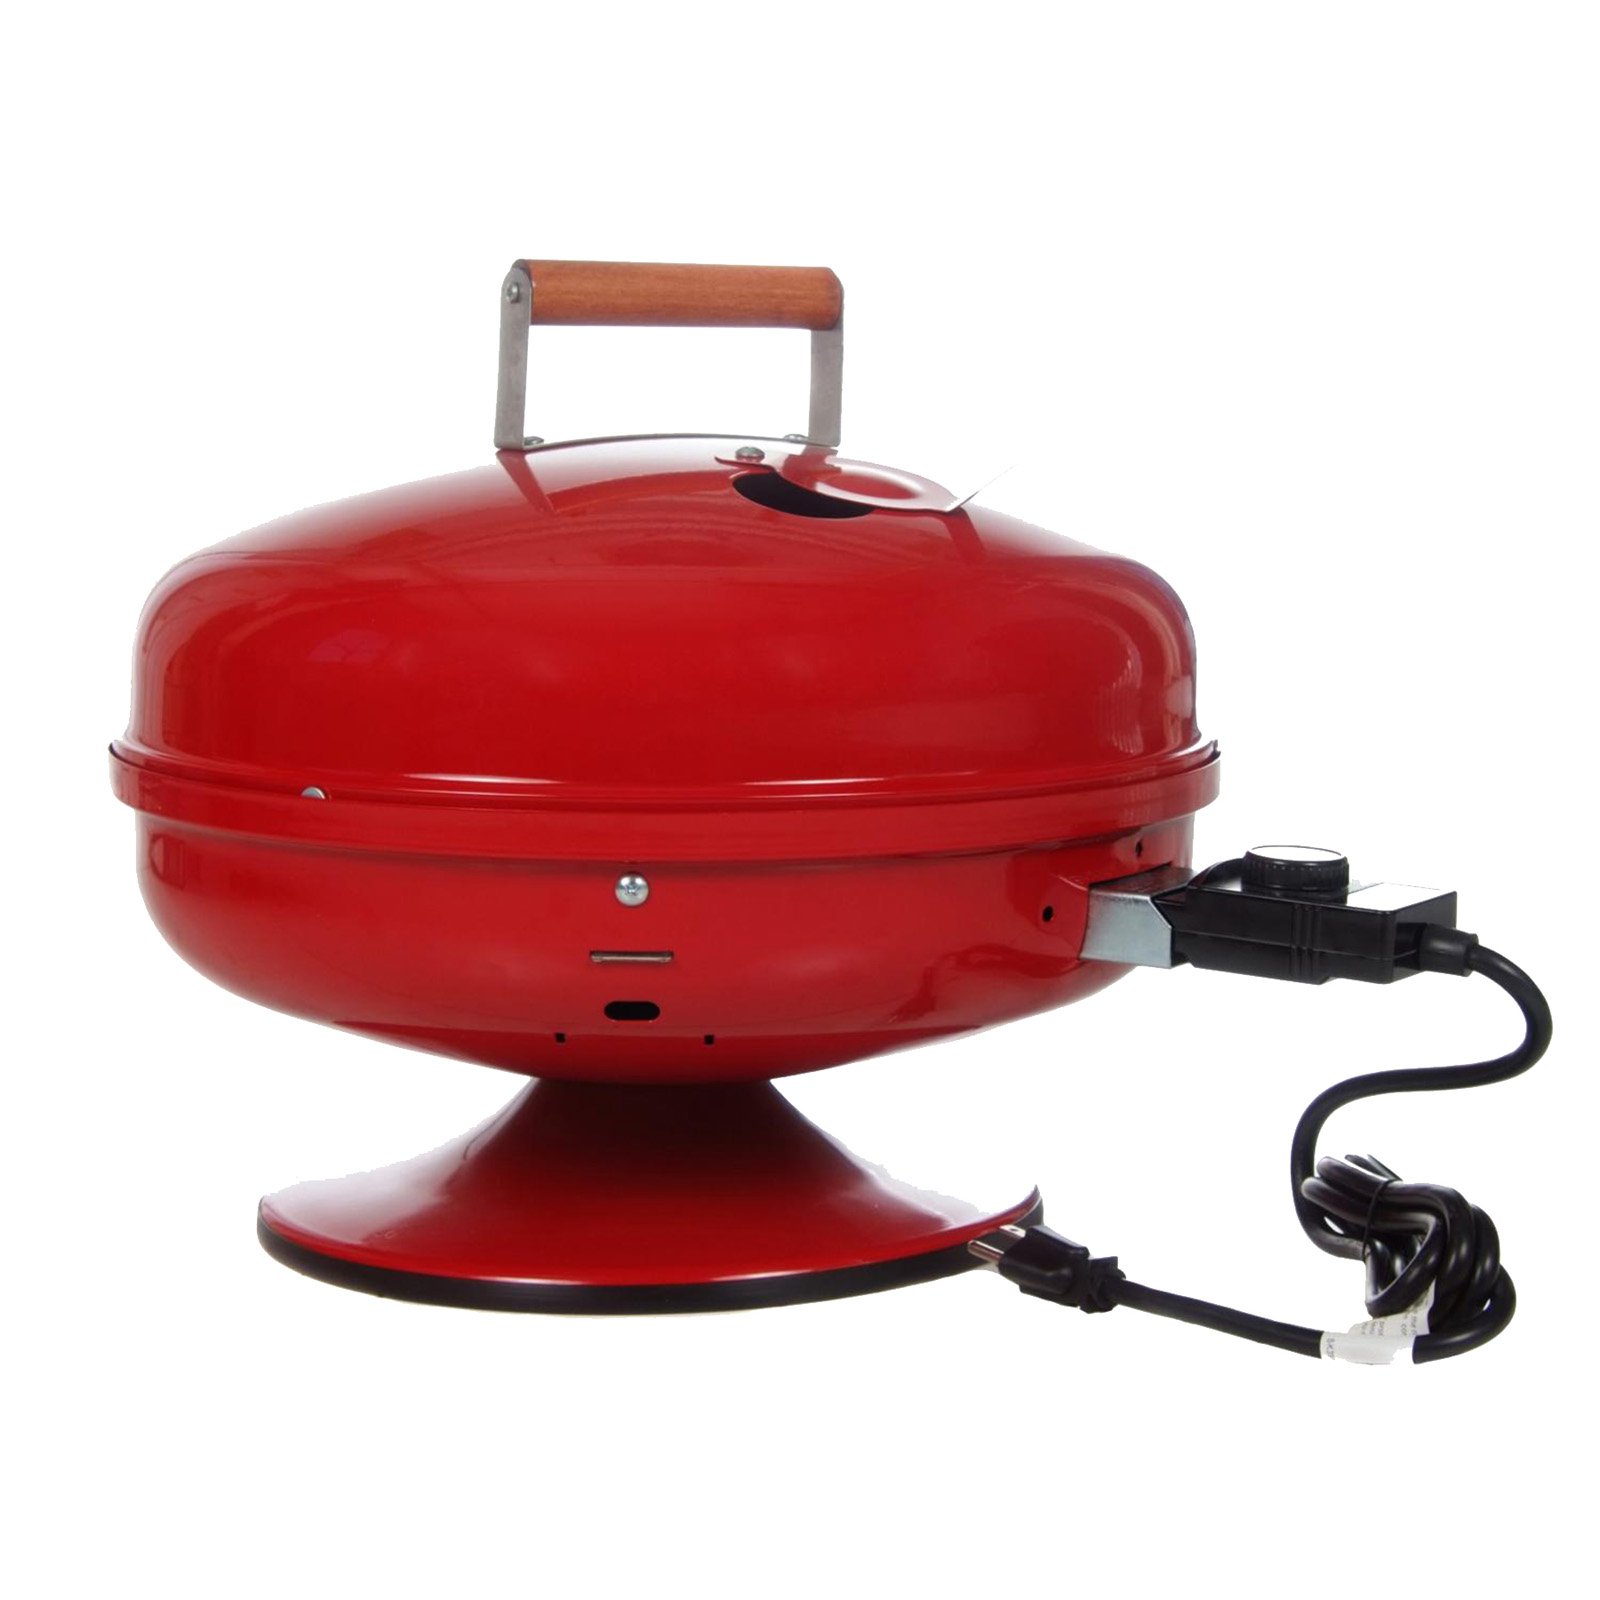 Americana Lock 'N Go Portable Electric Grill - Red - image 1 of 8